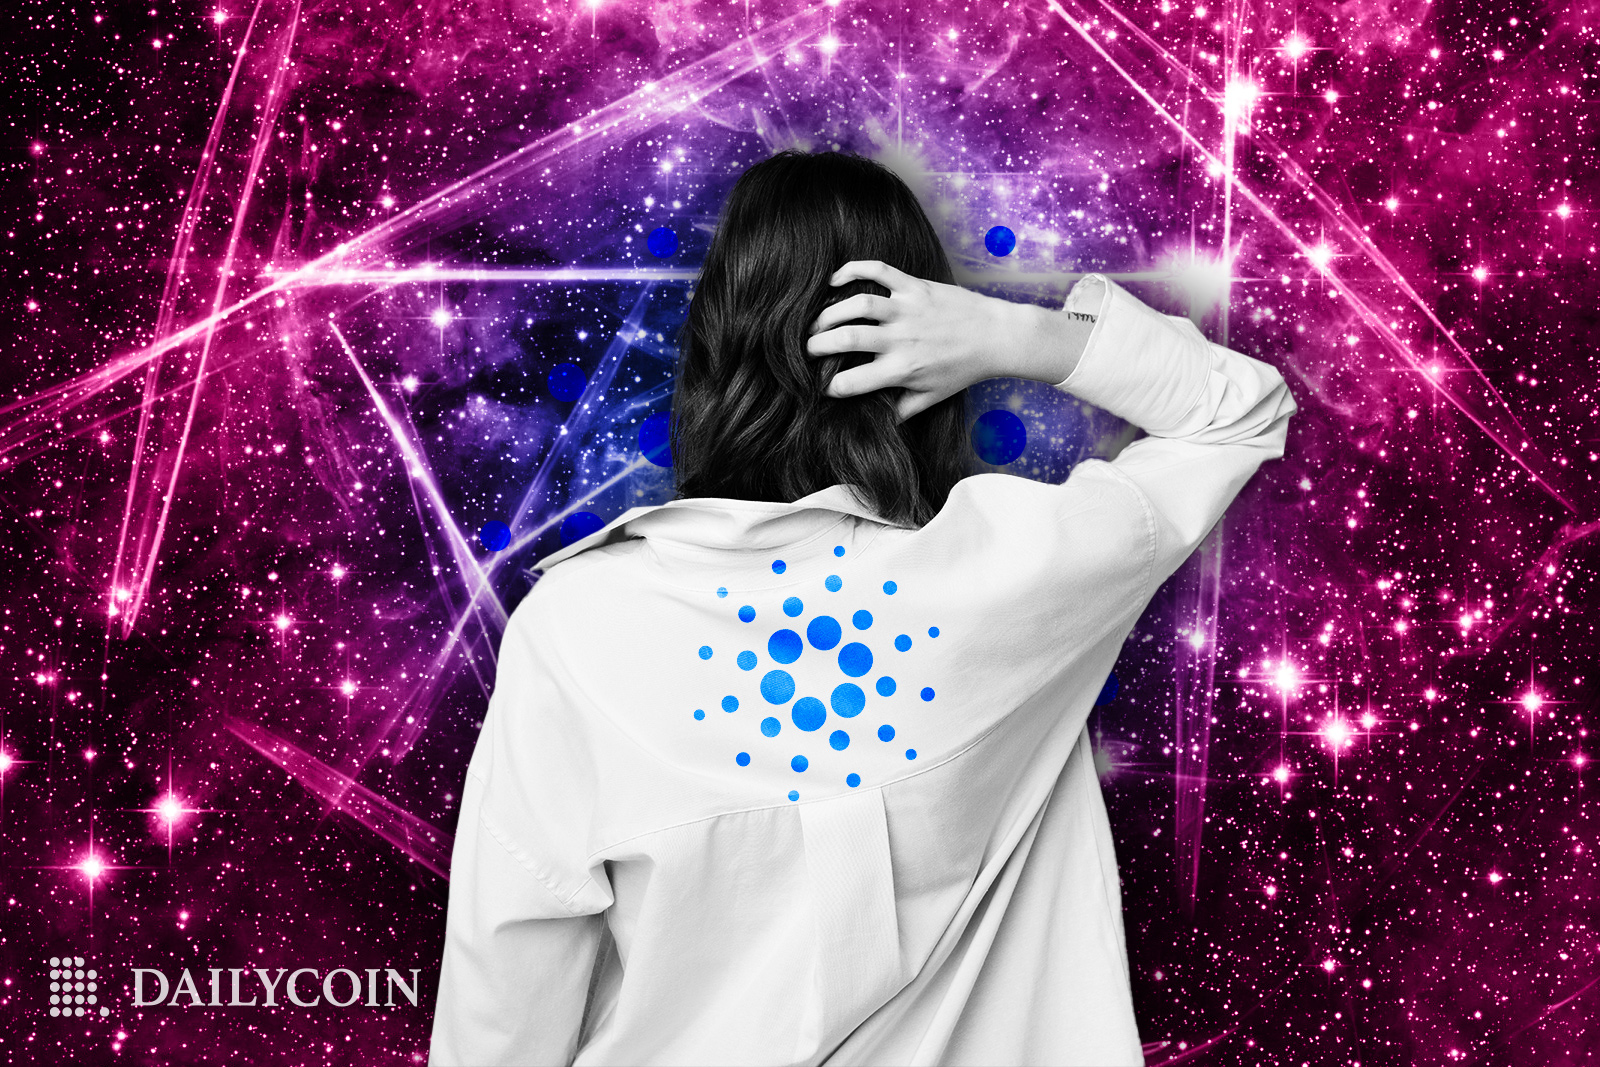 A woman wearing a shirt with Cardano logo staring at blockchain network.